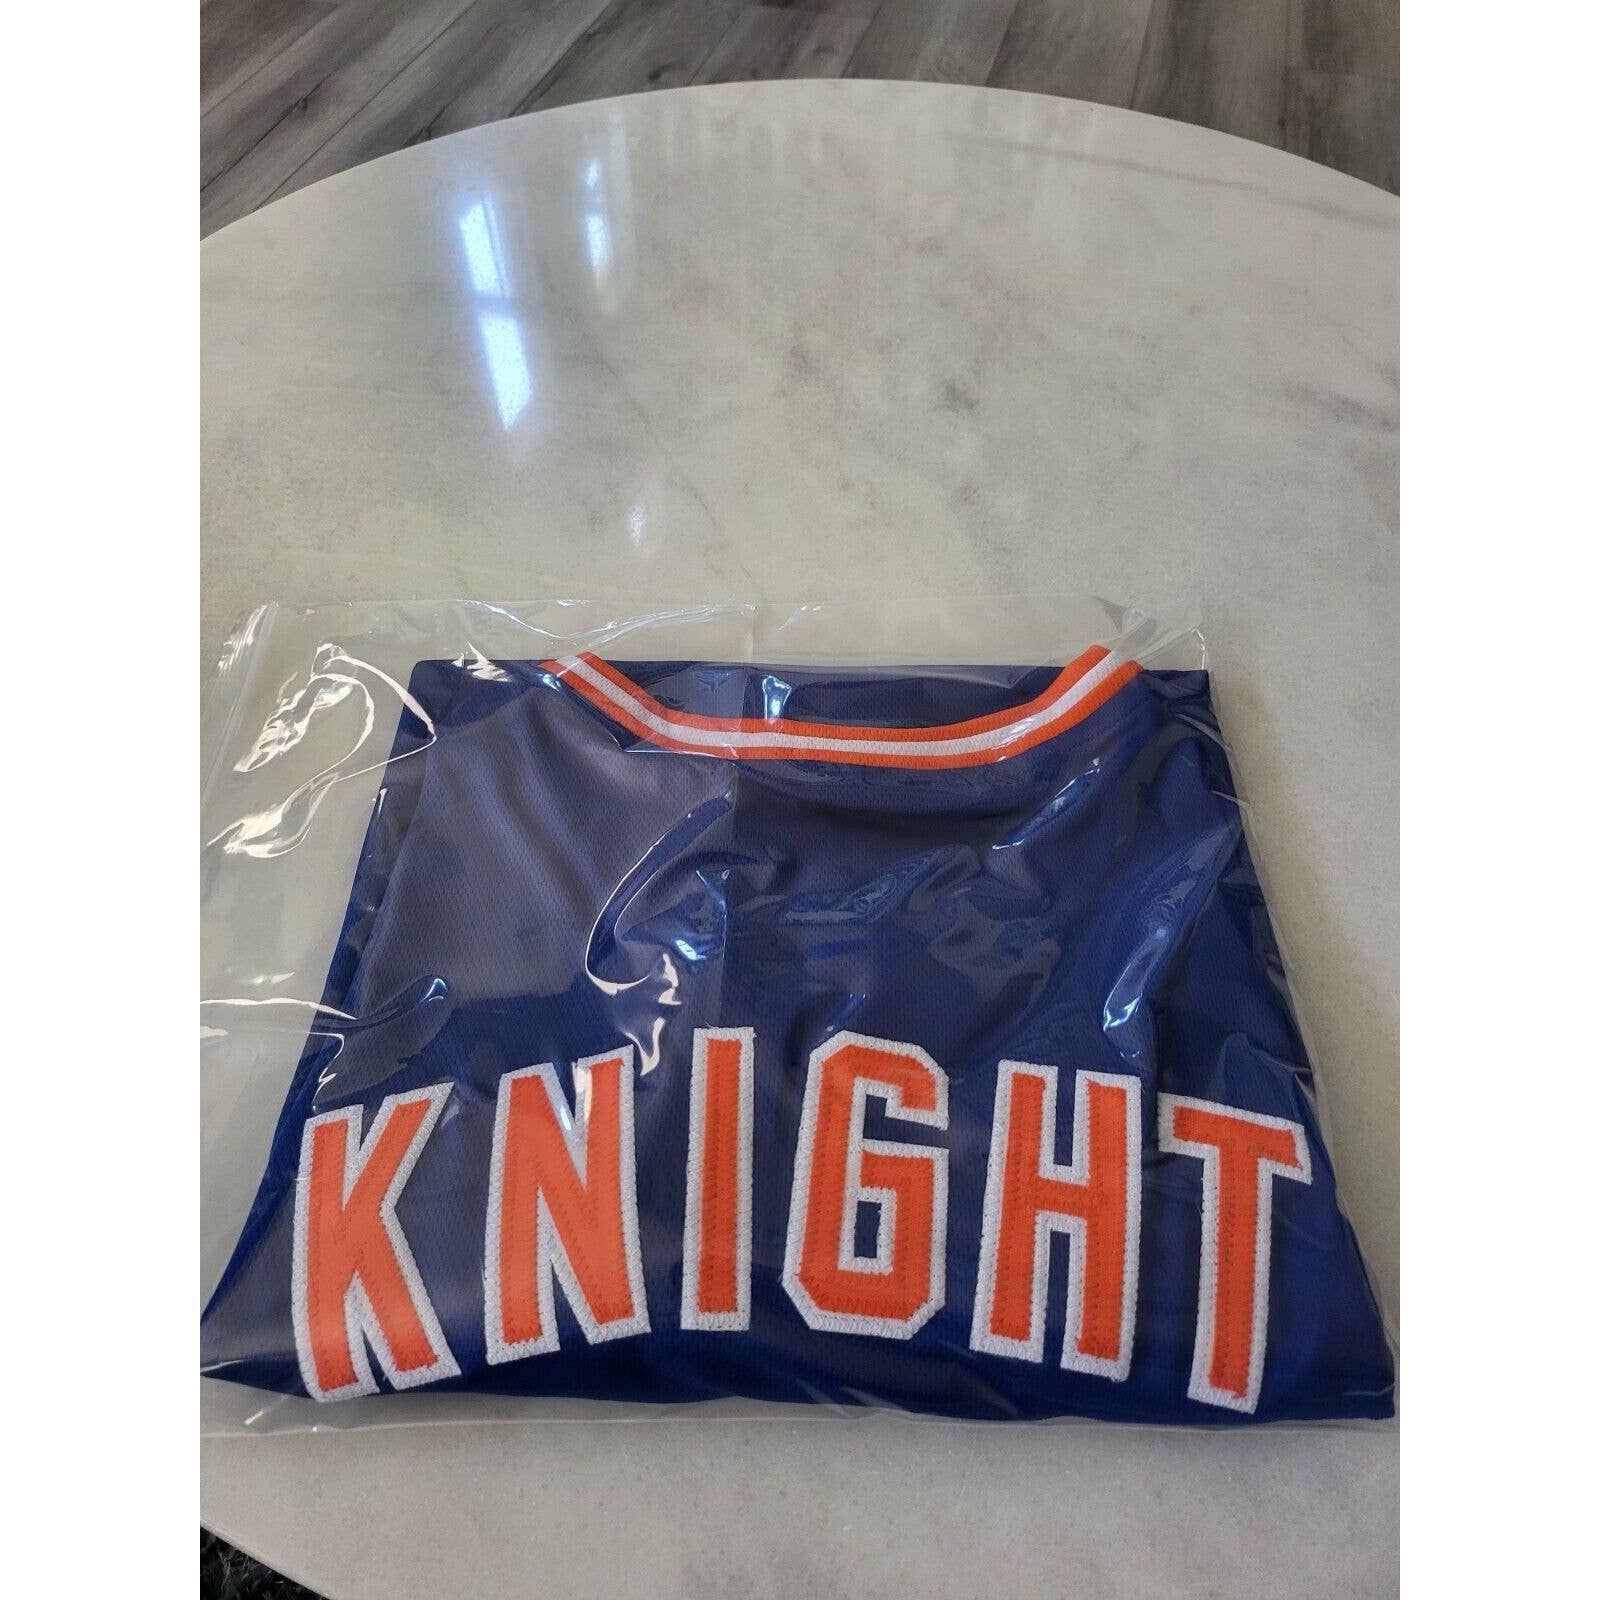 Ray Knight Autographed/Signed Jersey New York Mets NY - TreasuresEvolved